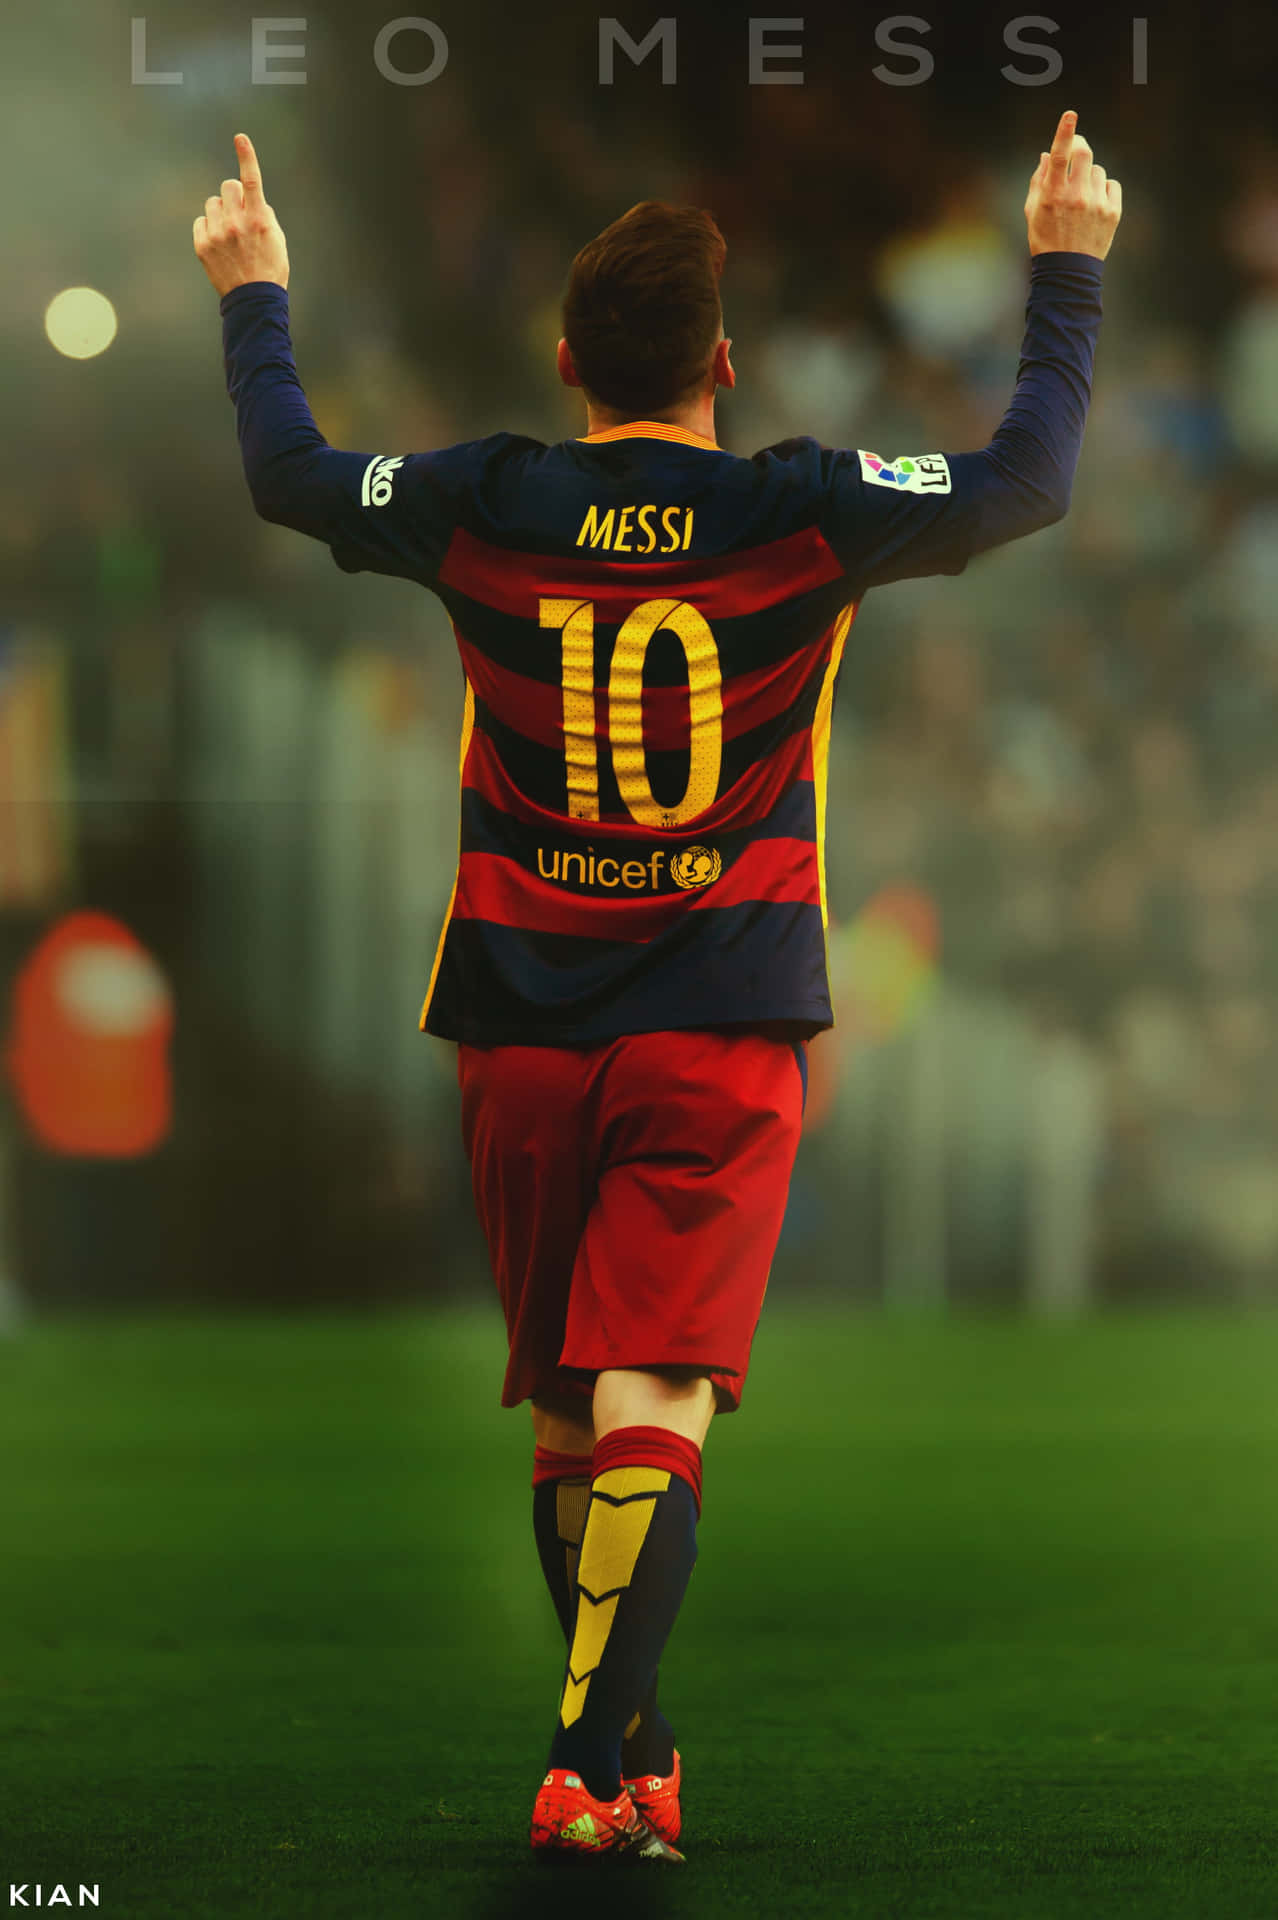 Lionel Messi displays his coolness. Wallpaper